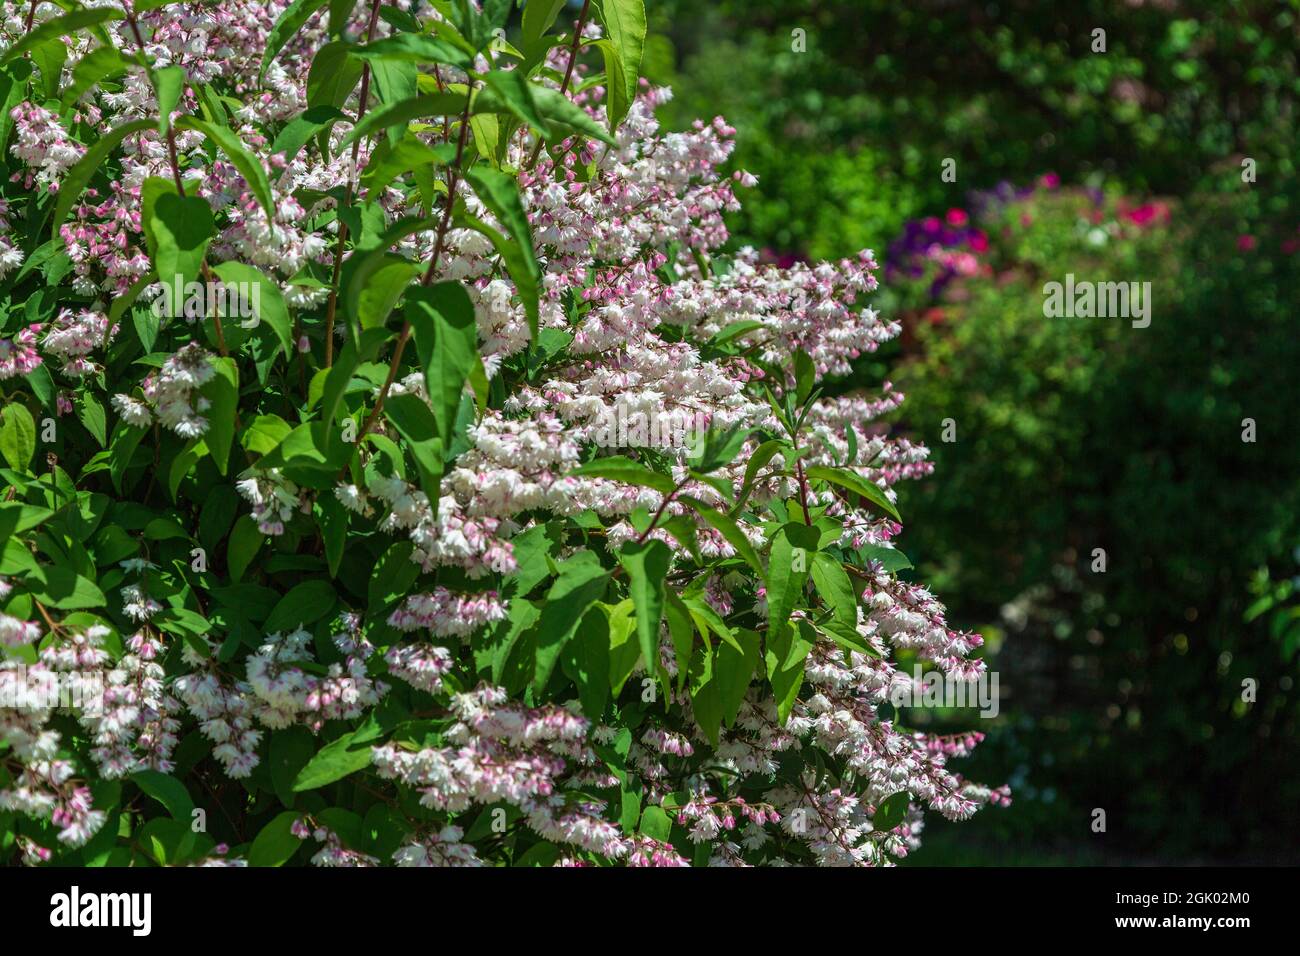 Shrub with beautiful white and pink full flowers Deutzia scabra flowering in spring Stock Photo